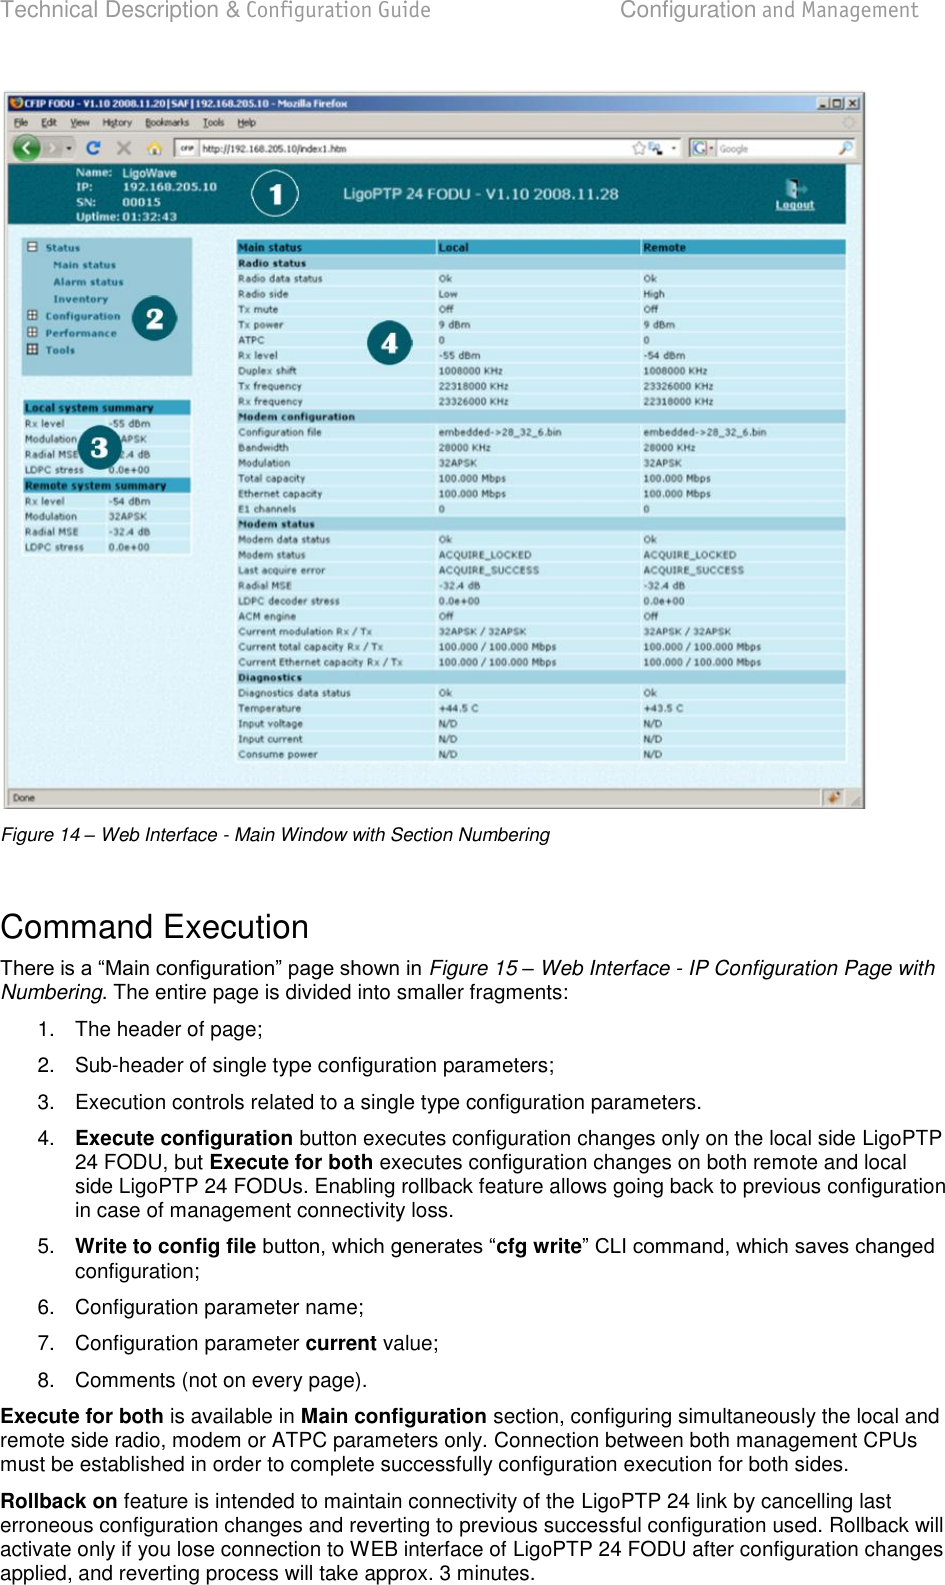 Technical Description &amp; Configuration Guide  Configuration and Management  LigoWave  Page 22   Figure 14 – Web Interface - Main Window with Section Numbering  Command Execution  Figure 15 – Web Interface - IP Configuration Page with Numbering. The entire page is divided into smaller fragments: 1.  The header of page; 2.  Sub-header of single type configuration parameters; 3.  Execution controls related to a single type configuration parameters. 4. Execute configuration button executes configuration changes only on the local side LigoPTP 24 FODU, but Execute for both executes configuration changes on both remote and local side LigoPTP 24 FODUs. Enabling rollback feature allows going back to previous configuration in case of management connectivity loss. 5. Write to config file cfg writeconfiguration; 6.  Configuration parameter name; 7.  Configuration parameter current value; 8.  Comments (not on every page). Execute for both is available in Main configuration section, configuring simultaneously the local and remote side radio, modem or ATPC parameters only. Connection between both management CPUs must be established in order to complete successfully configuration execution for both sides. Rollback on feature is intended to maintain connectivity of the LigoPTP 24 link by cancelling last erroneous configuration changes and reverting to previous successful configuration used. Rollback will activate only if you lose connection to WEB interface of LigoPTP 24 FODU after configuration changes applied, and reverting process will take approx. 3 minutes.  